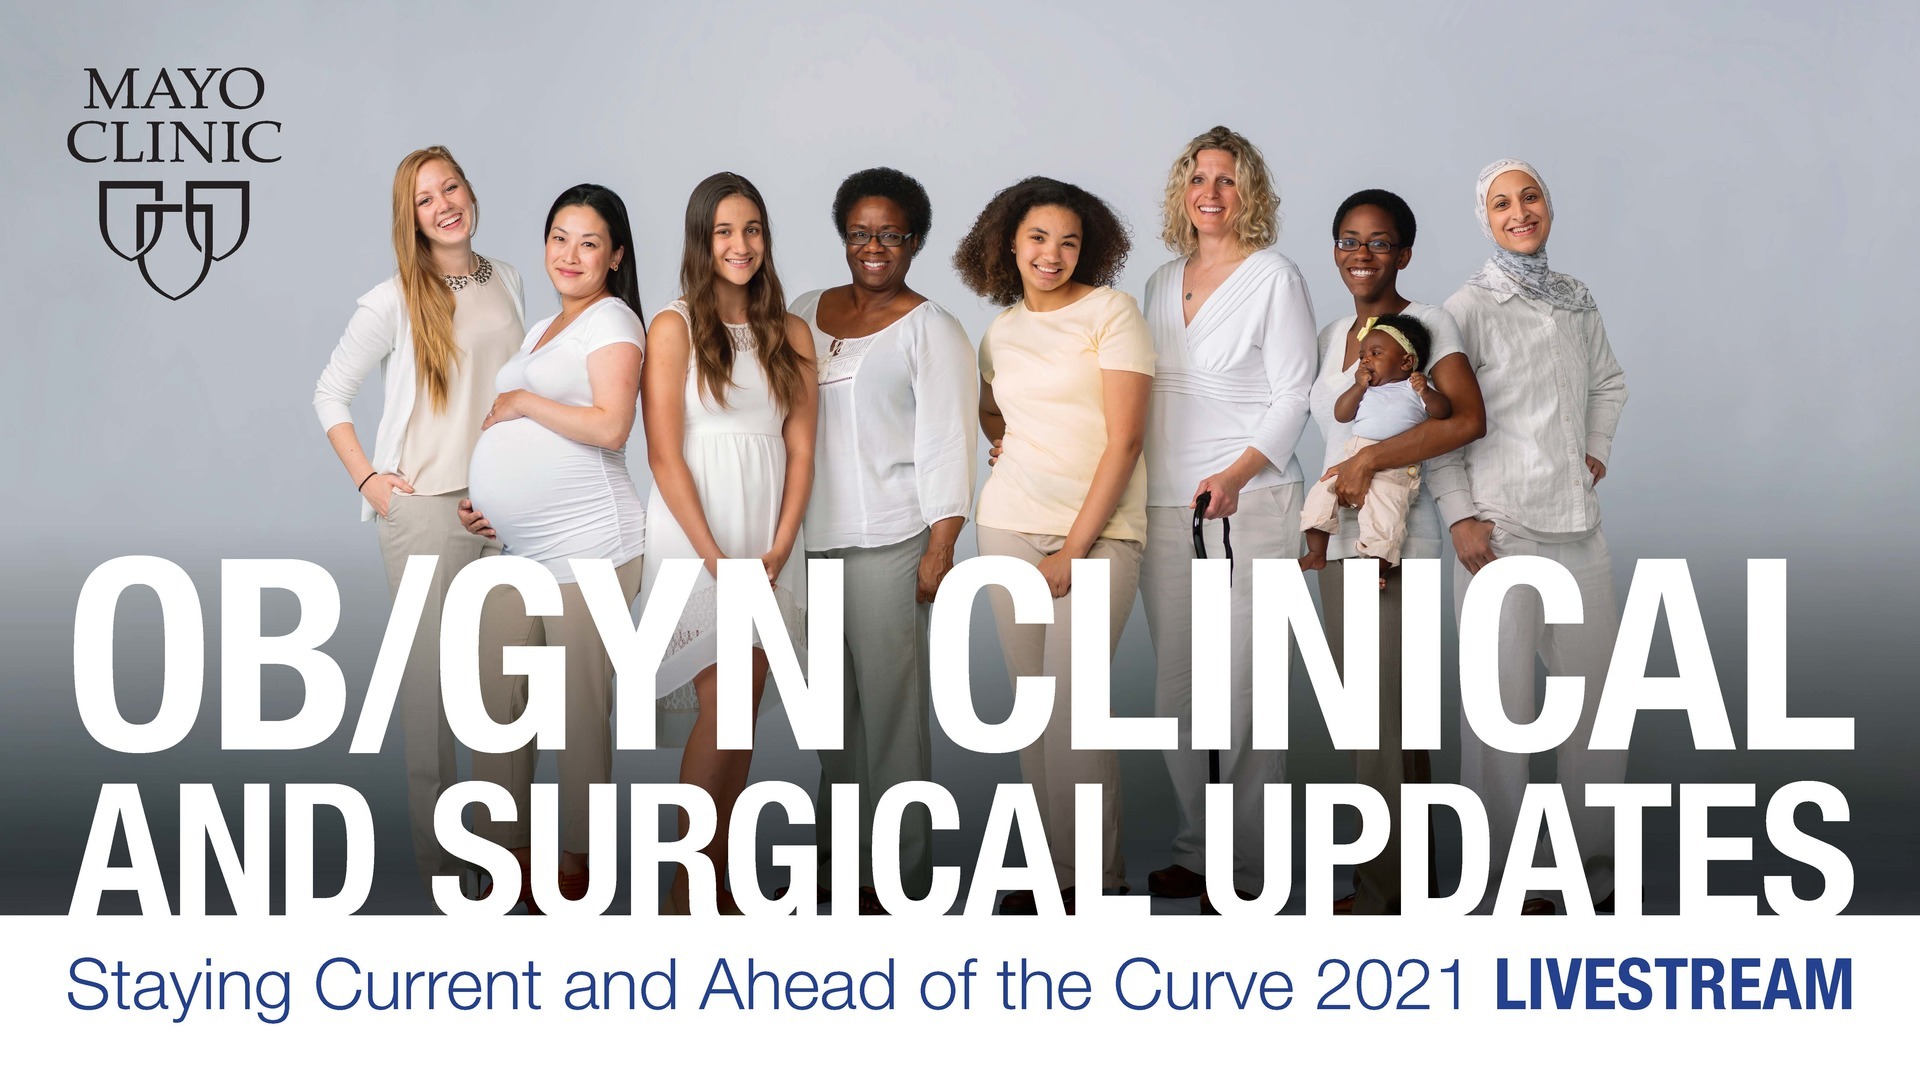 Mayo Clinic OB/GYN Clinical and Surgical Updates: Staying Current and Ahead of the Curve 2021 - LIVE